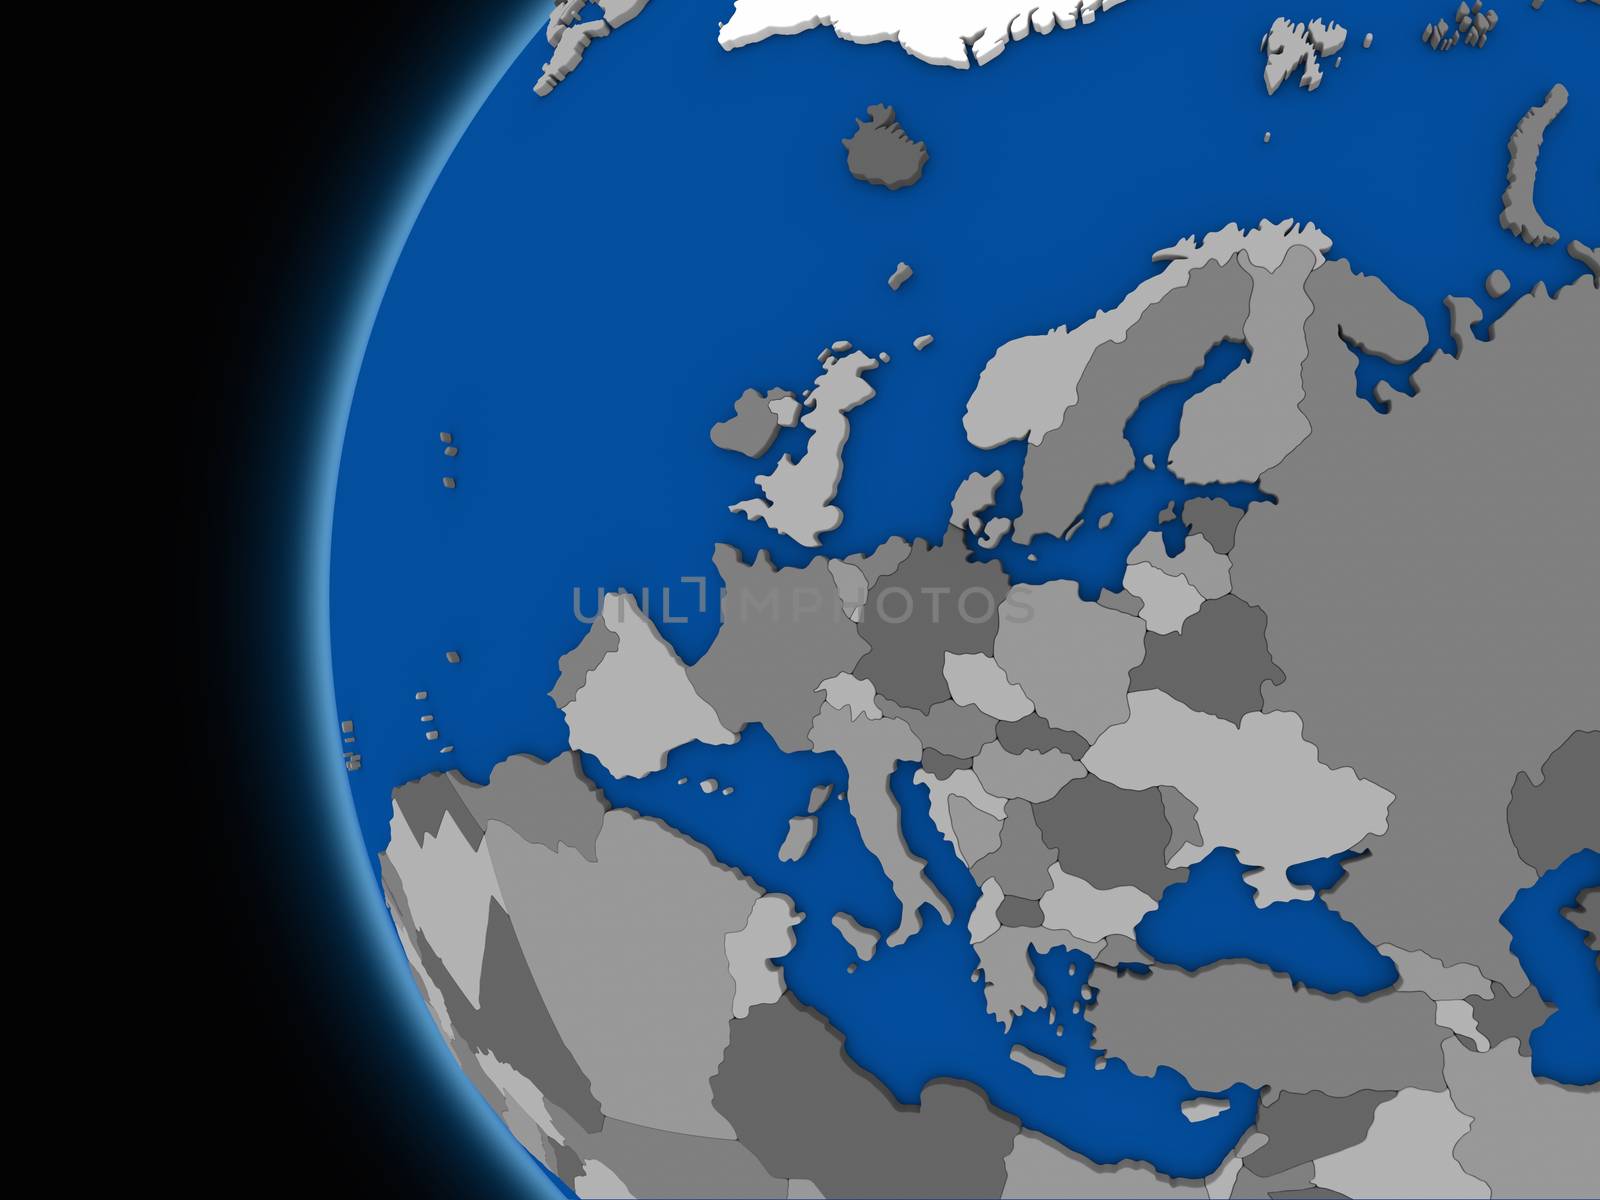 European continent on political Earth by Harvepino